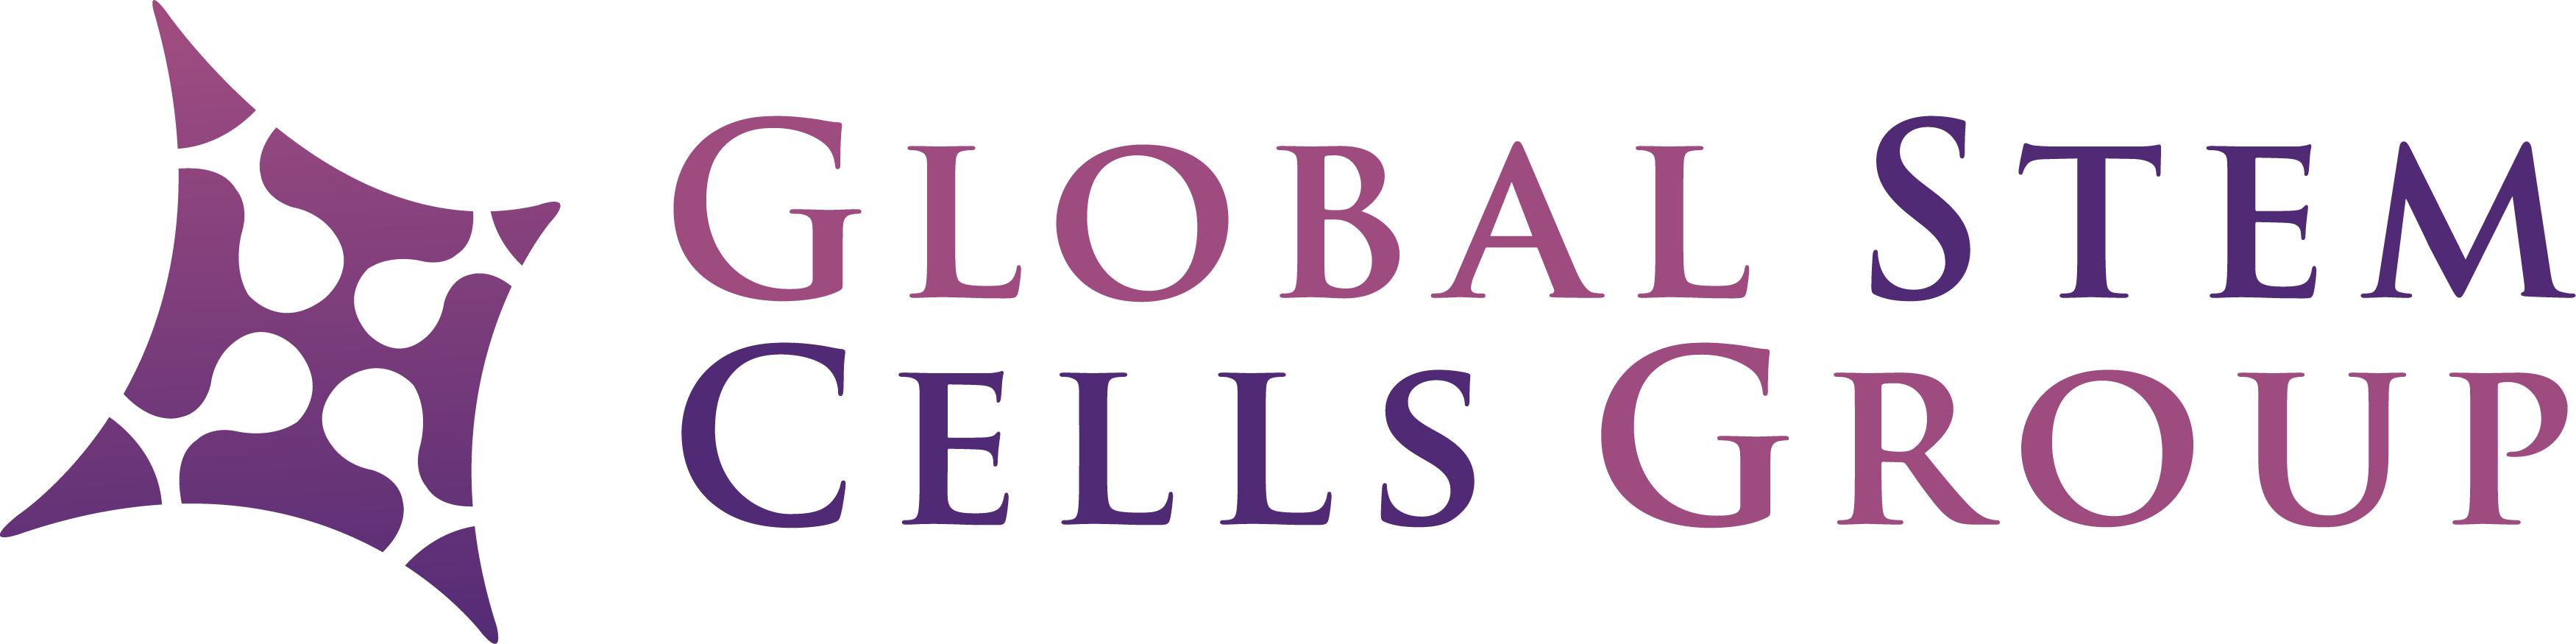 Global Stem Cells Group Announces the Opening of Cell Therapy and Regenerative Medicine Center in Indonesia